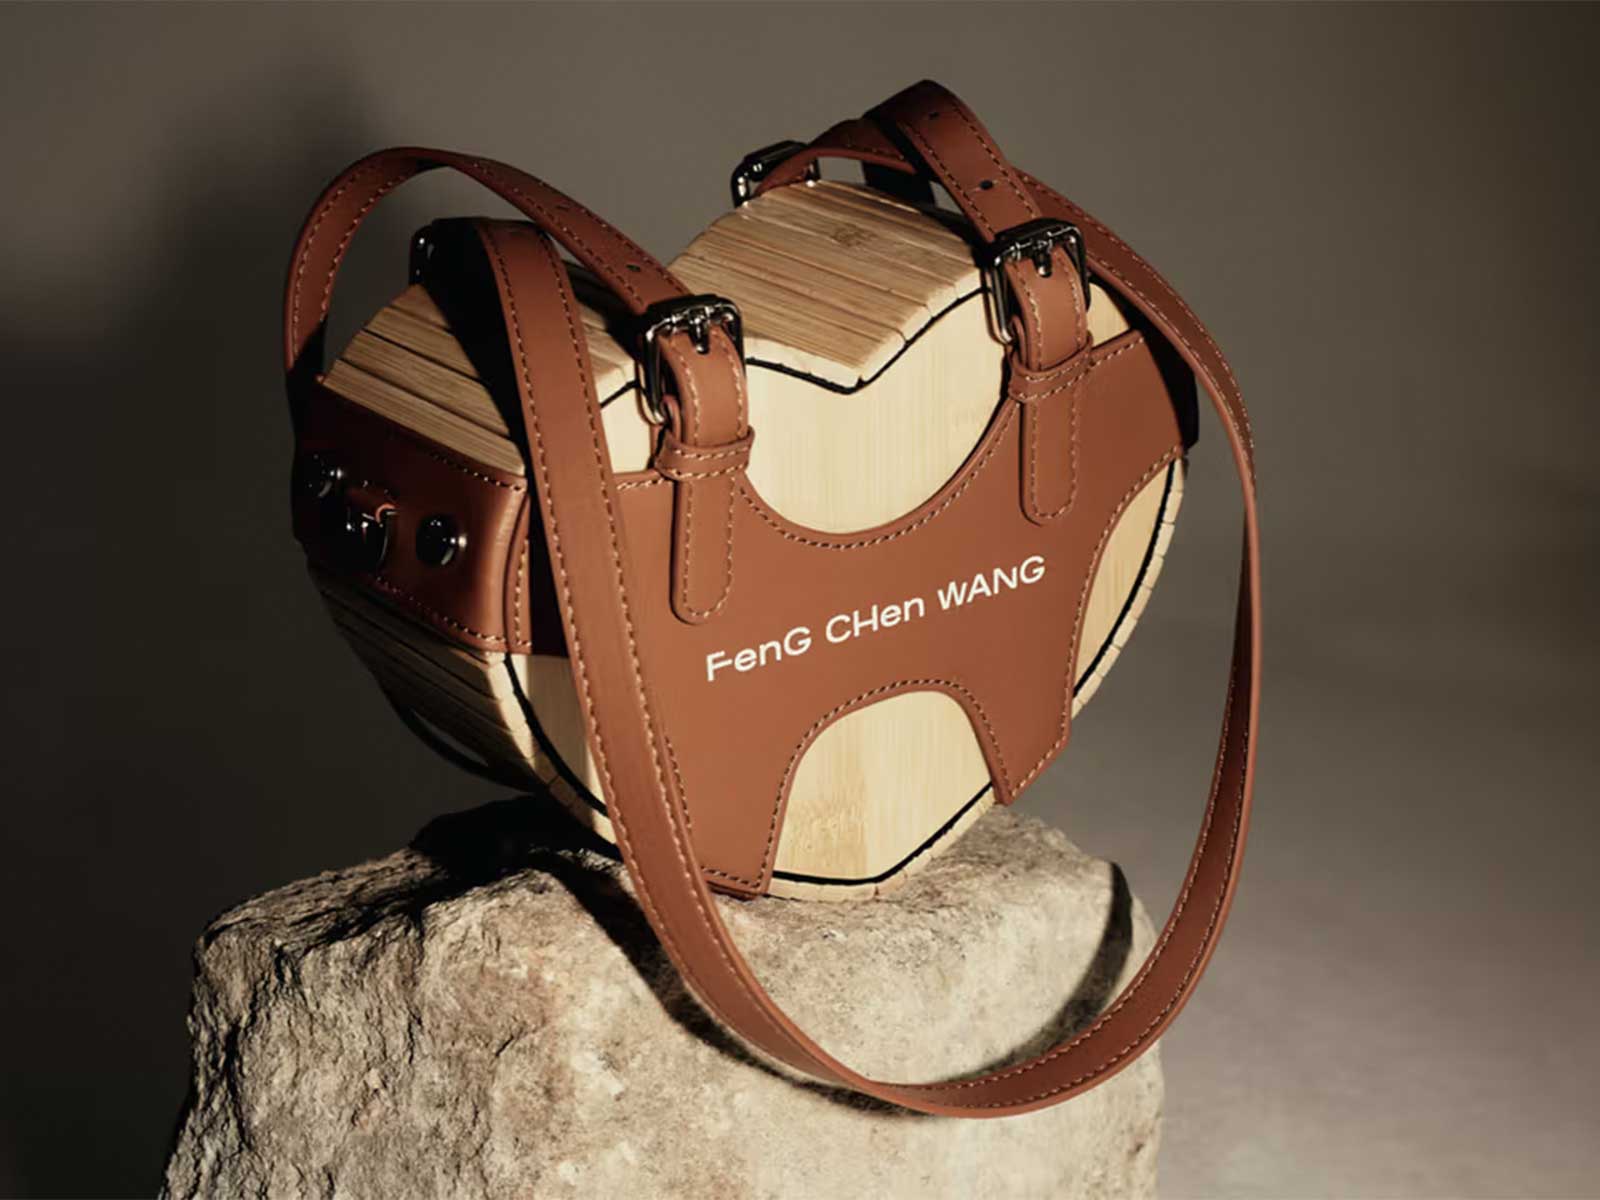 Feng Chen Wang's new Bamboo bag comes in the shape of a heart ...